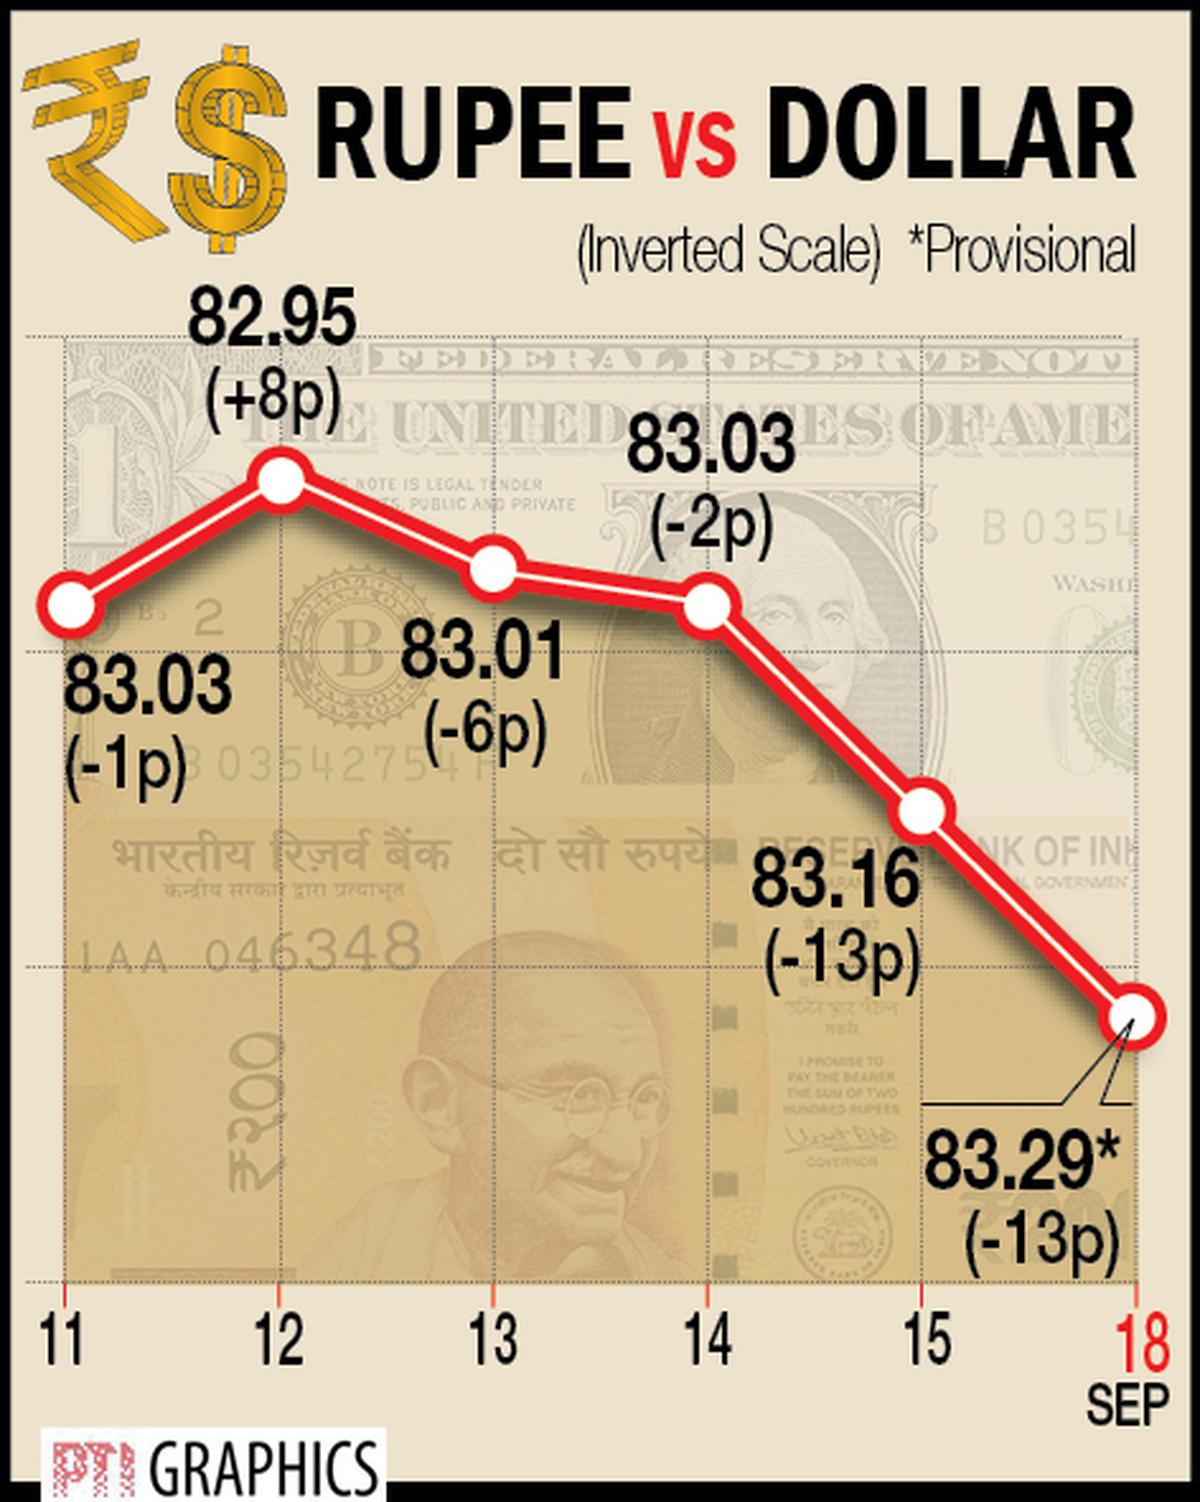 Rupee rises 6 paise against U.S. dollar in early trade